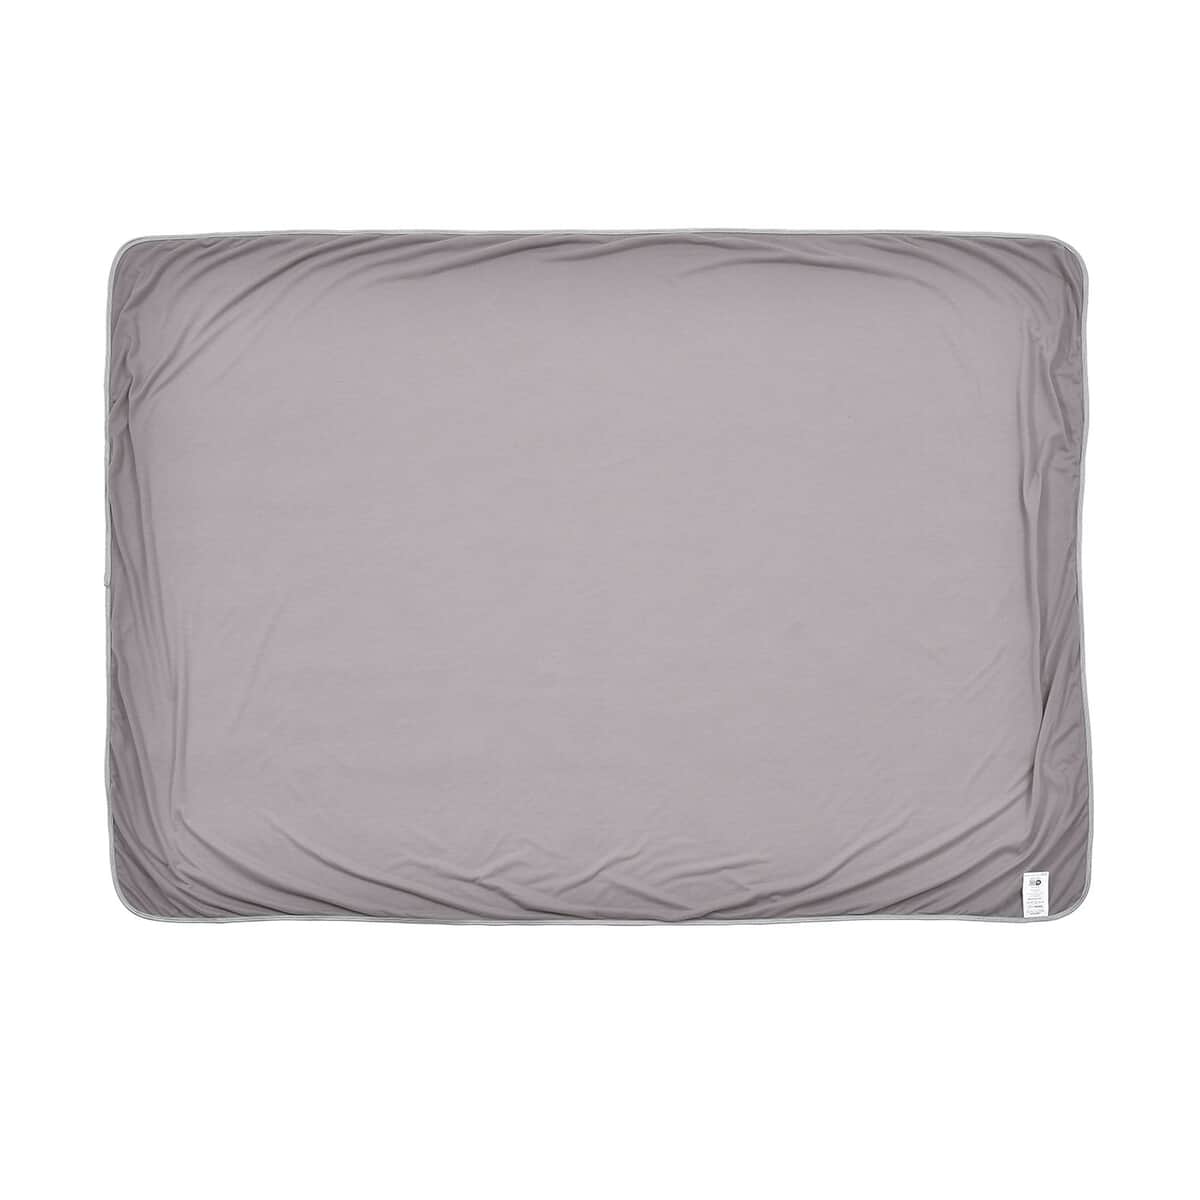 Homesmart Blue 70% Nylon and 30% Polyester Cooling Blanket (60x80) image number 2